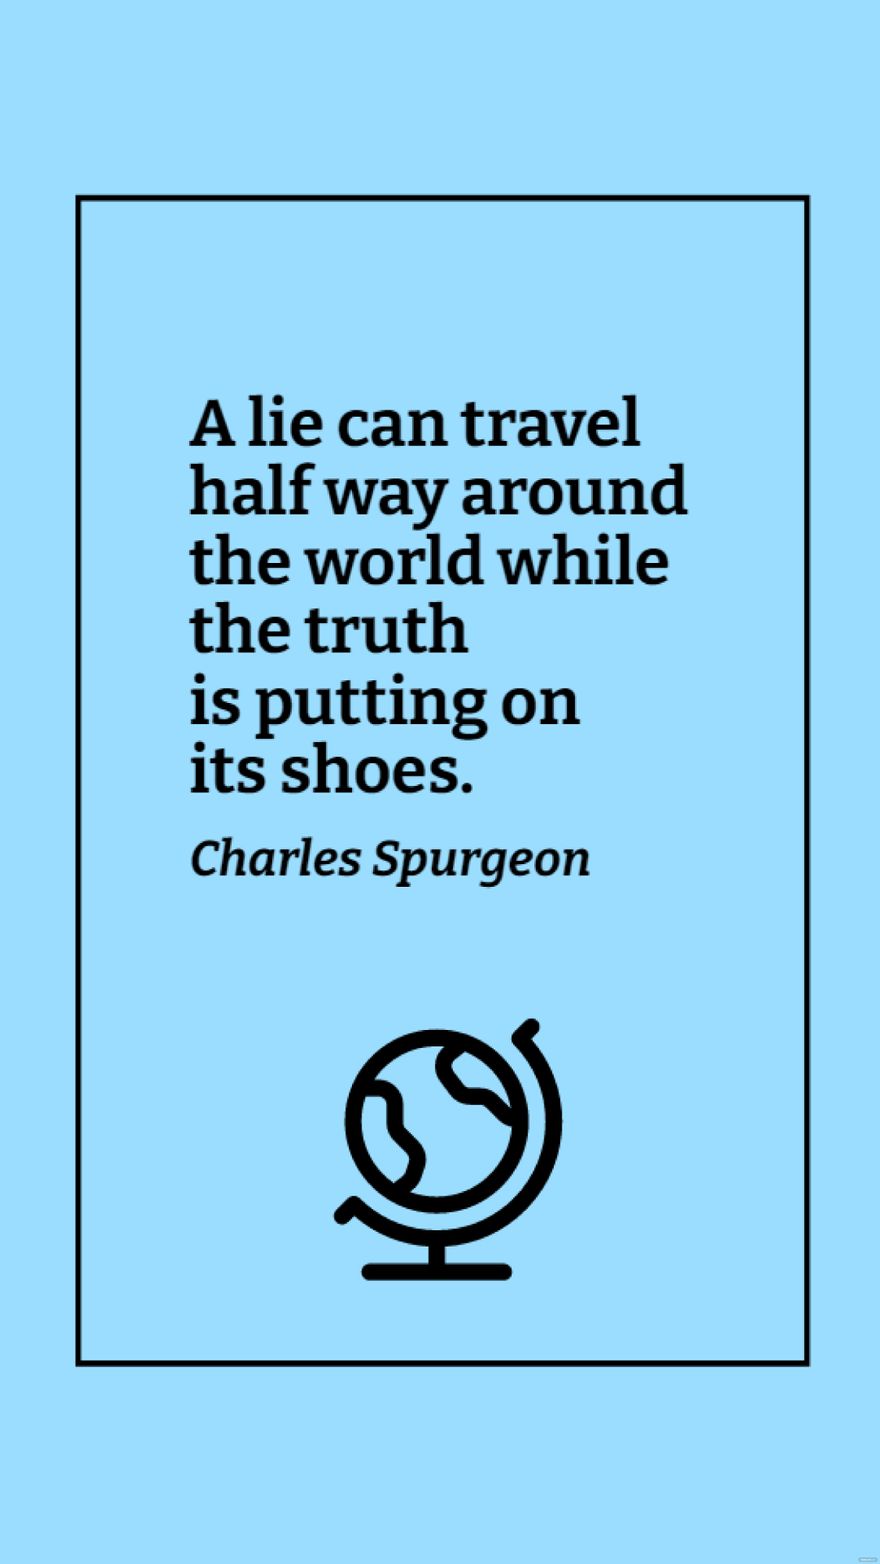 Free Charles Spurgeon - A lie can travel half way around the world while the truth is putting on its shoes. in JPG